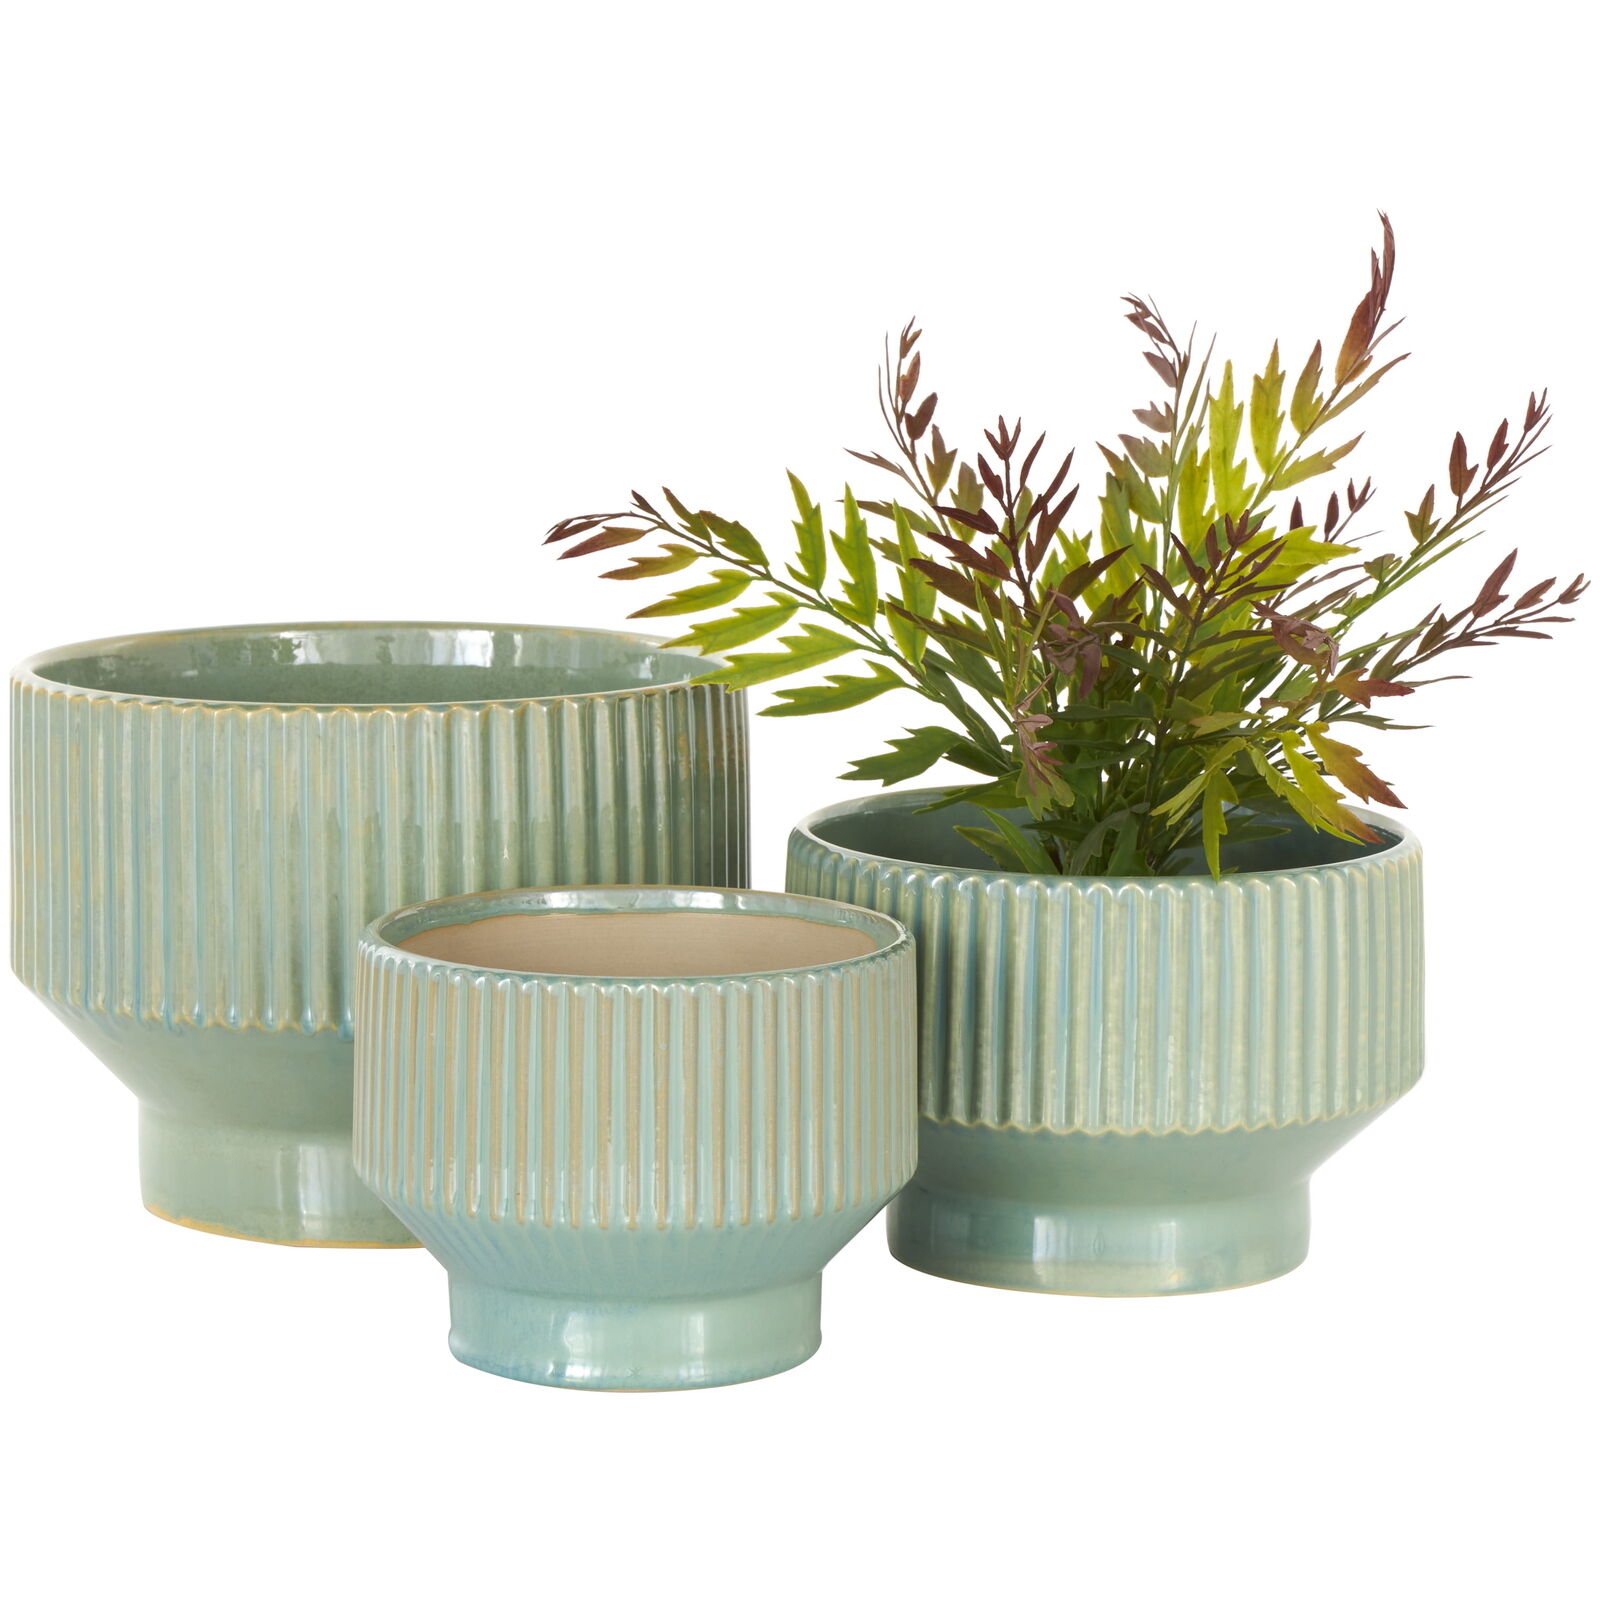 Wide Green Ceramic Planter with Linear Grooves and Tapered Bases (3 Count)